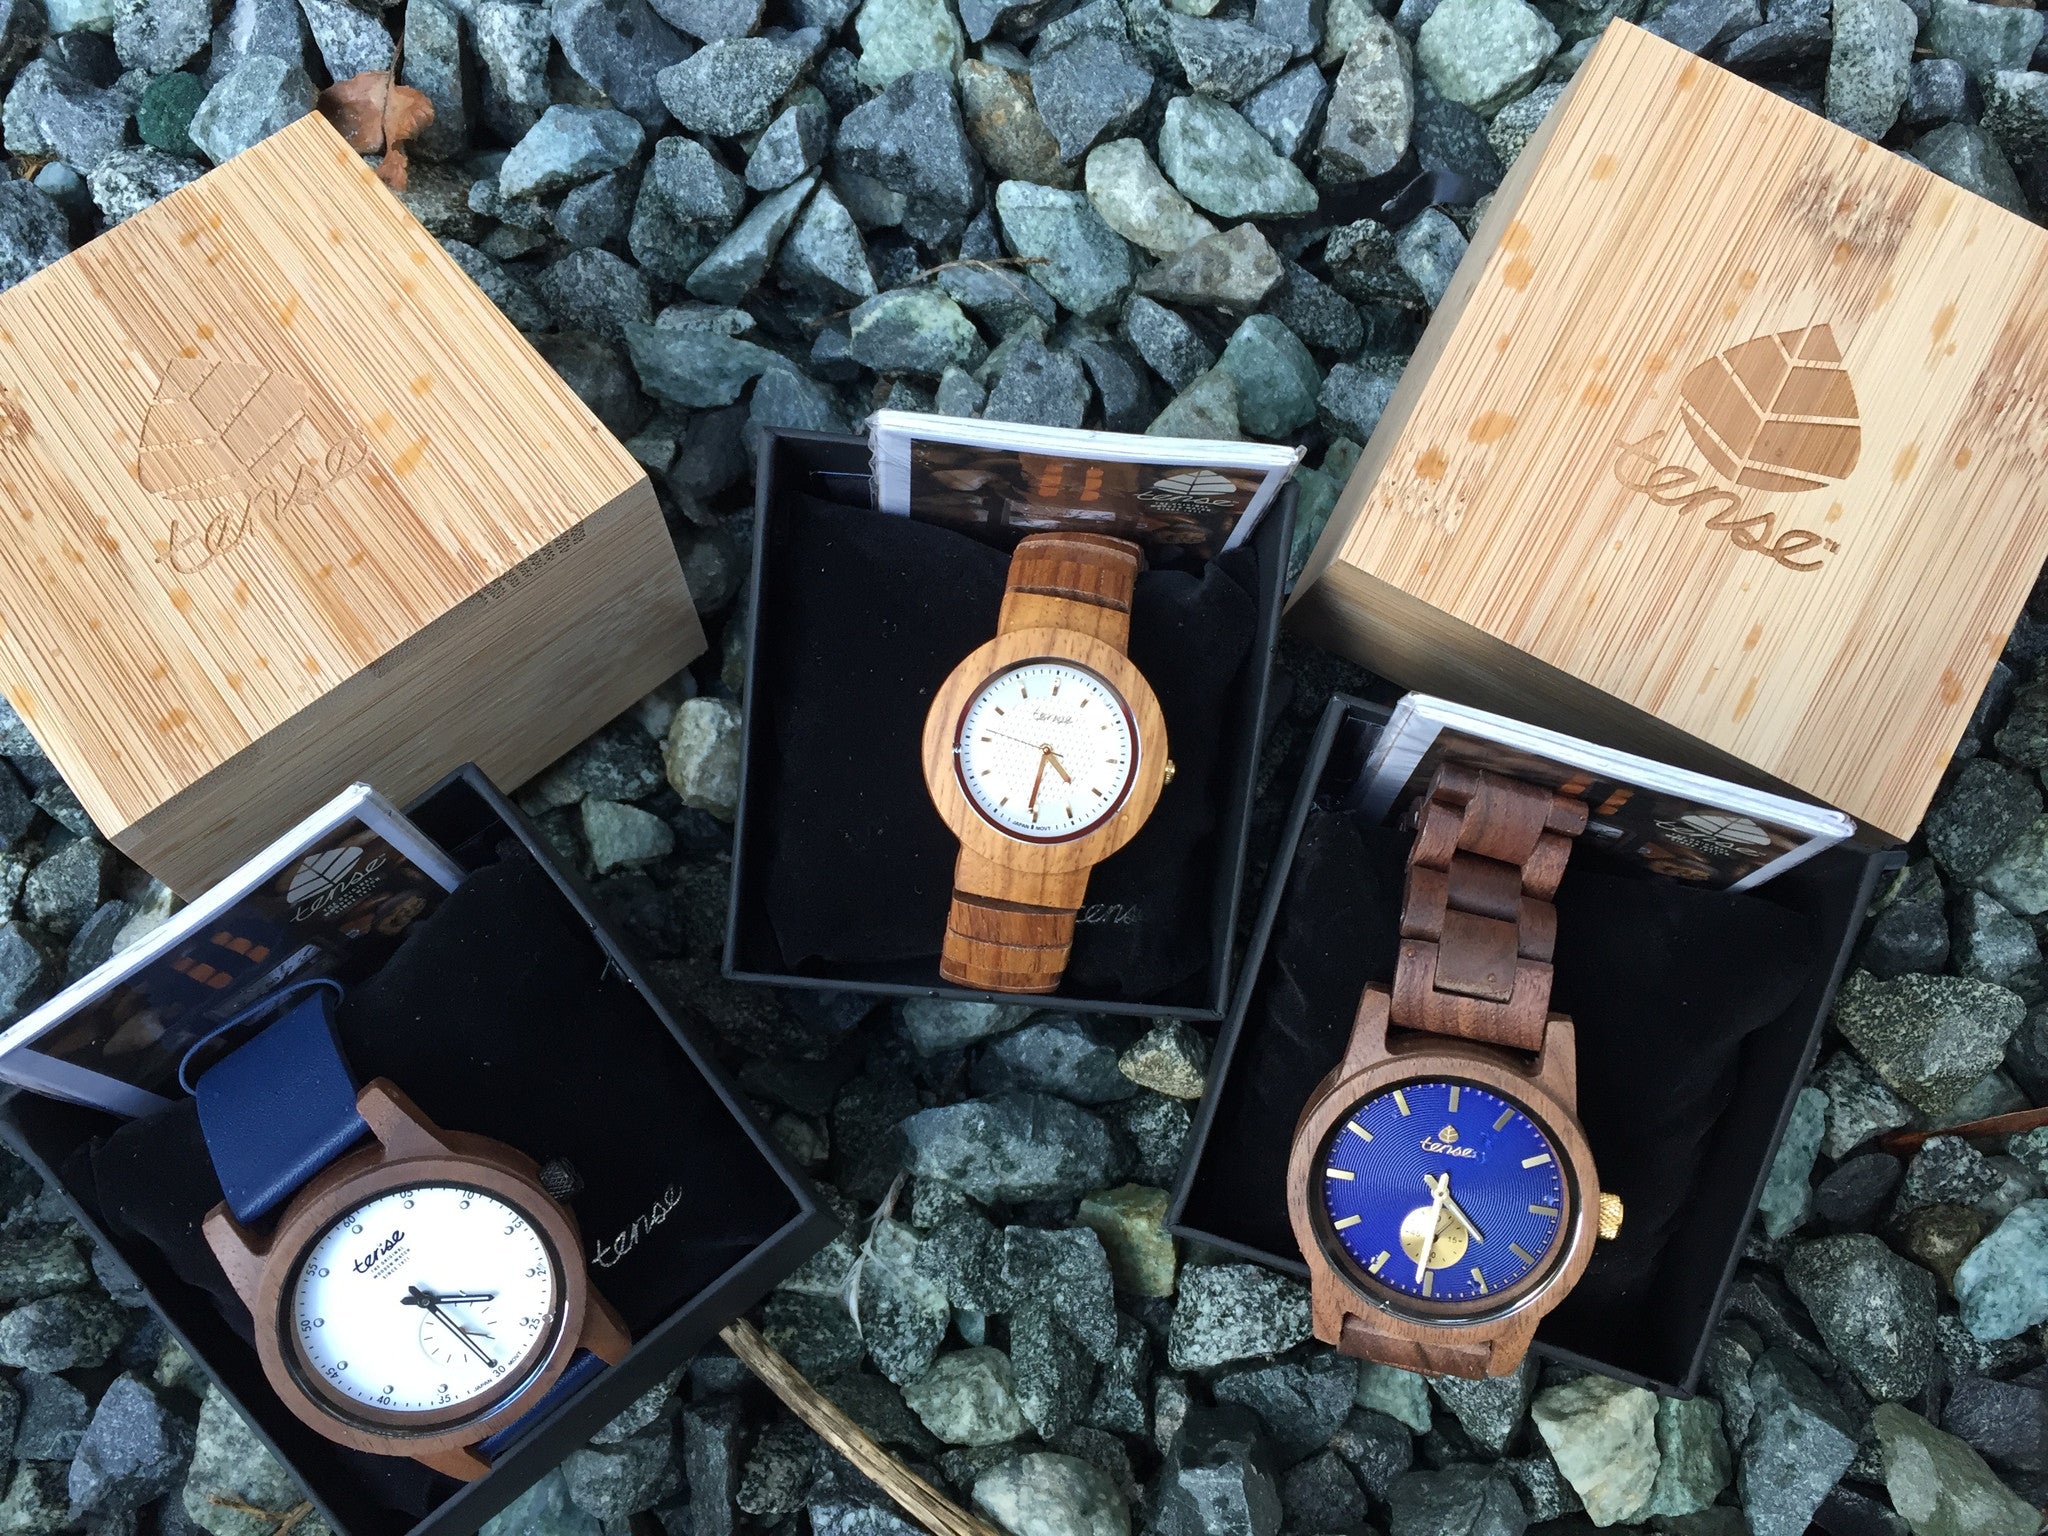 A New Look For The Originial Wooden Watch